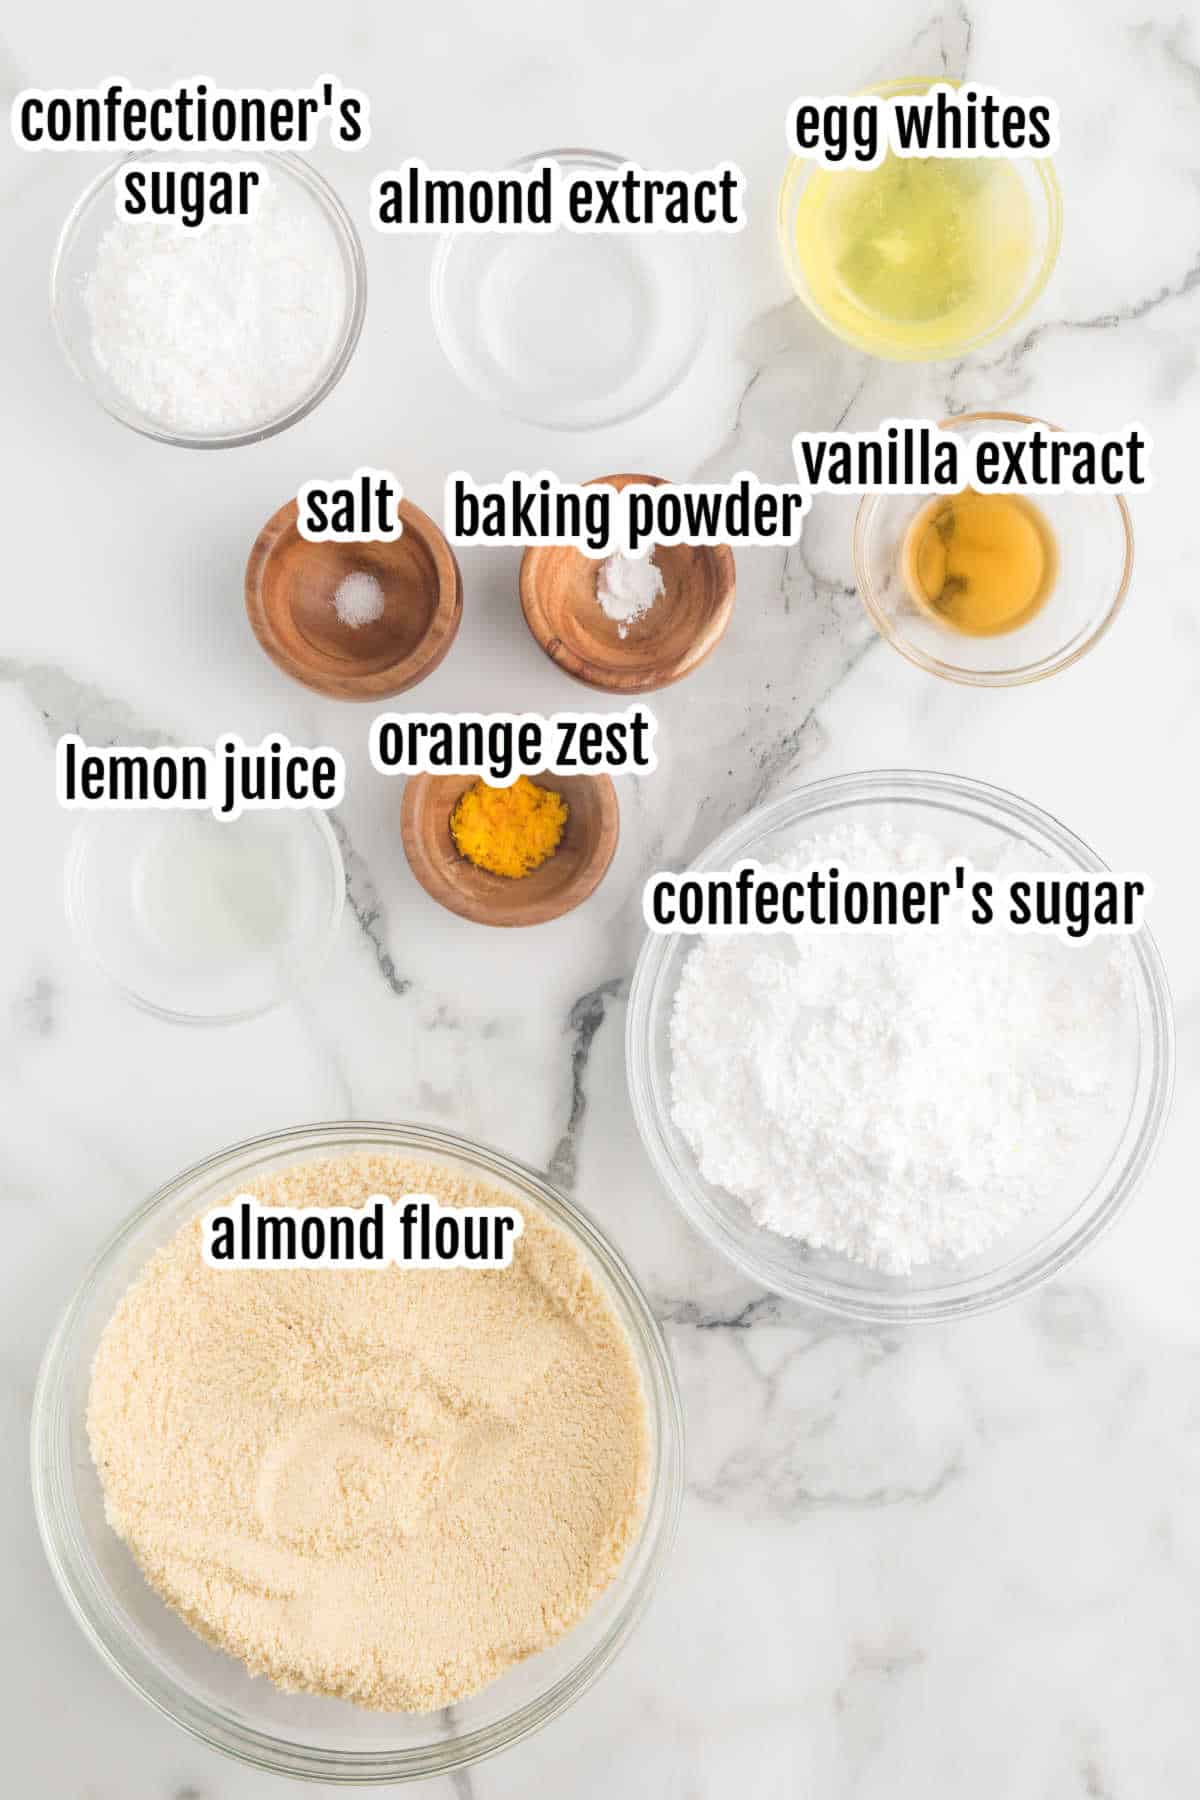 Image of the ingredients needed to make the Italian almond-flavored cookies Ricciarelli. 